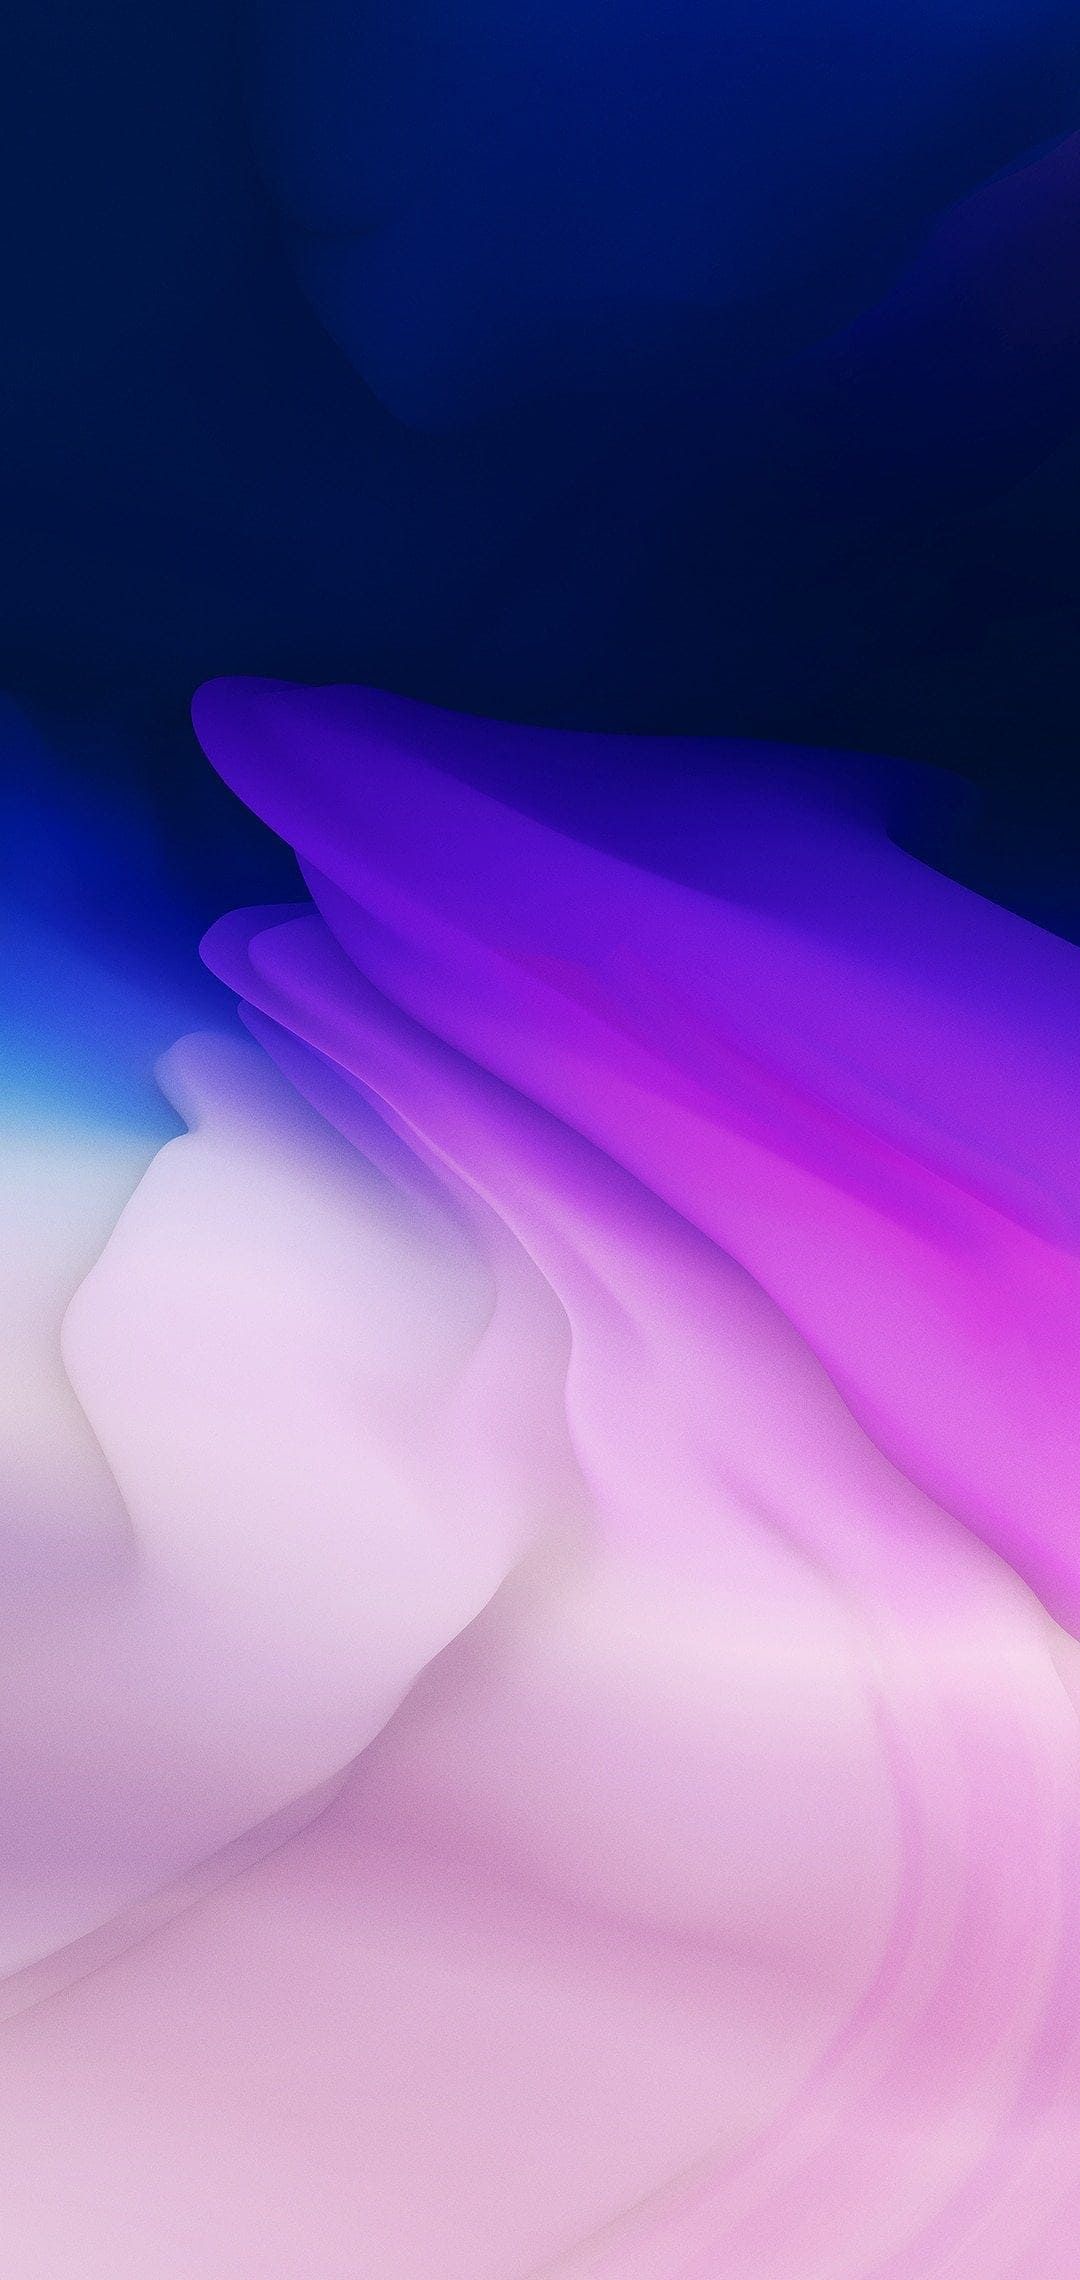 Download OnePlus 6 Stock Wallpaper Update New Wallpaper (4K). Android wallpaper, Abstract iphone wallpaper, iPhone wallpaper